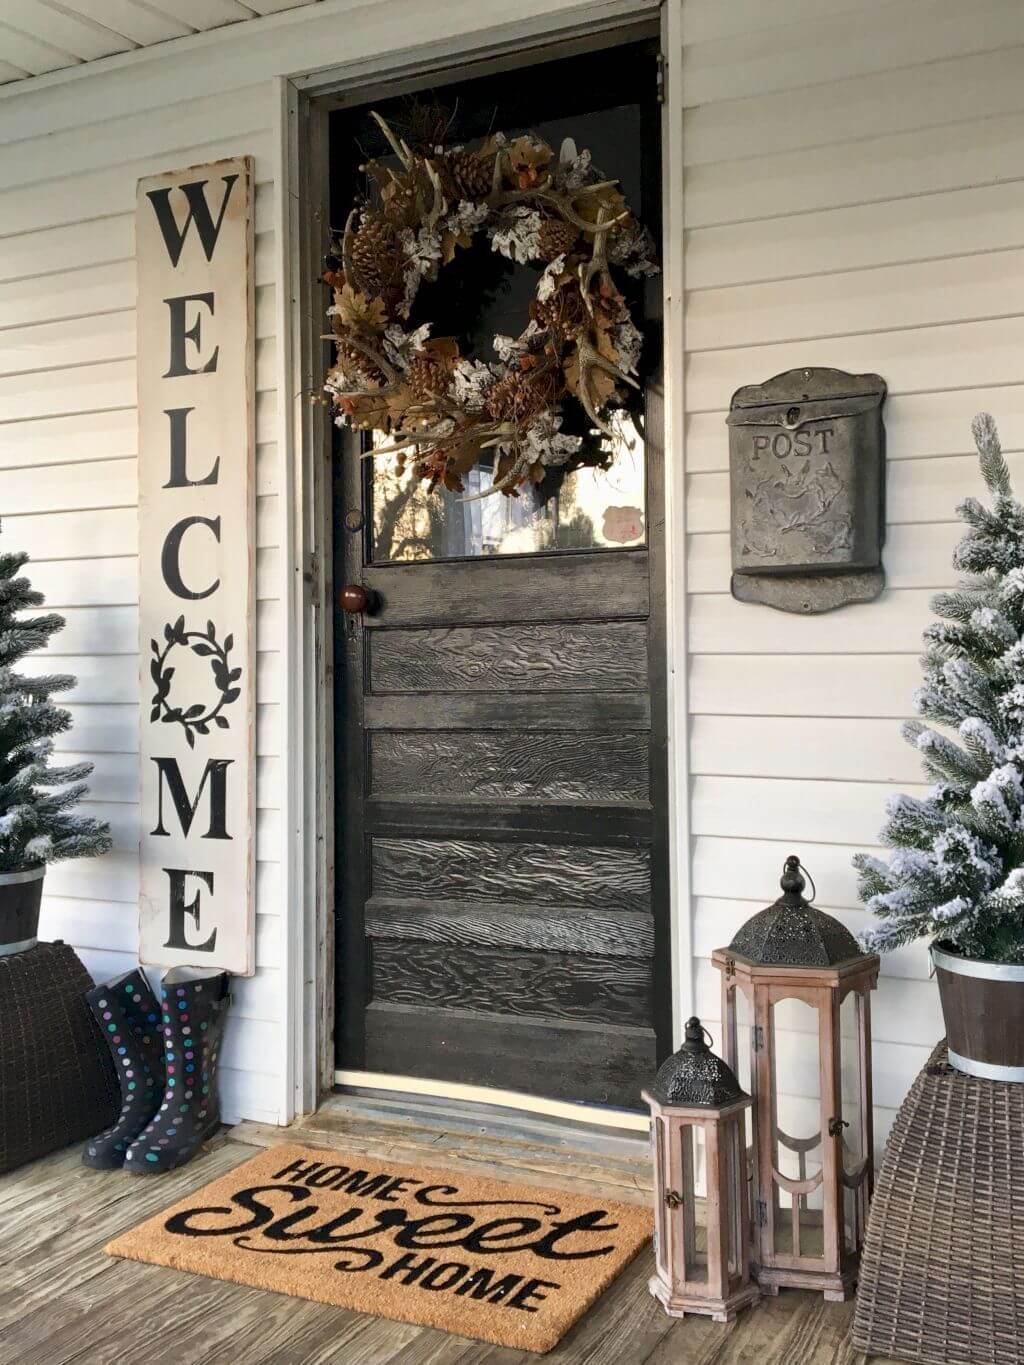 33 Best Rustic Farmhouse Wreath Ideas and Designs for 2020